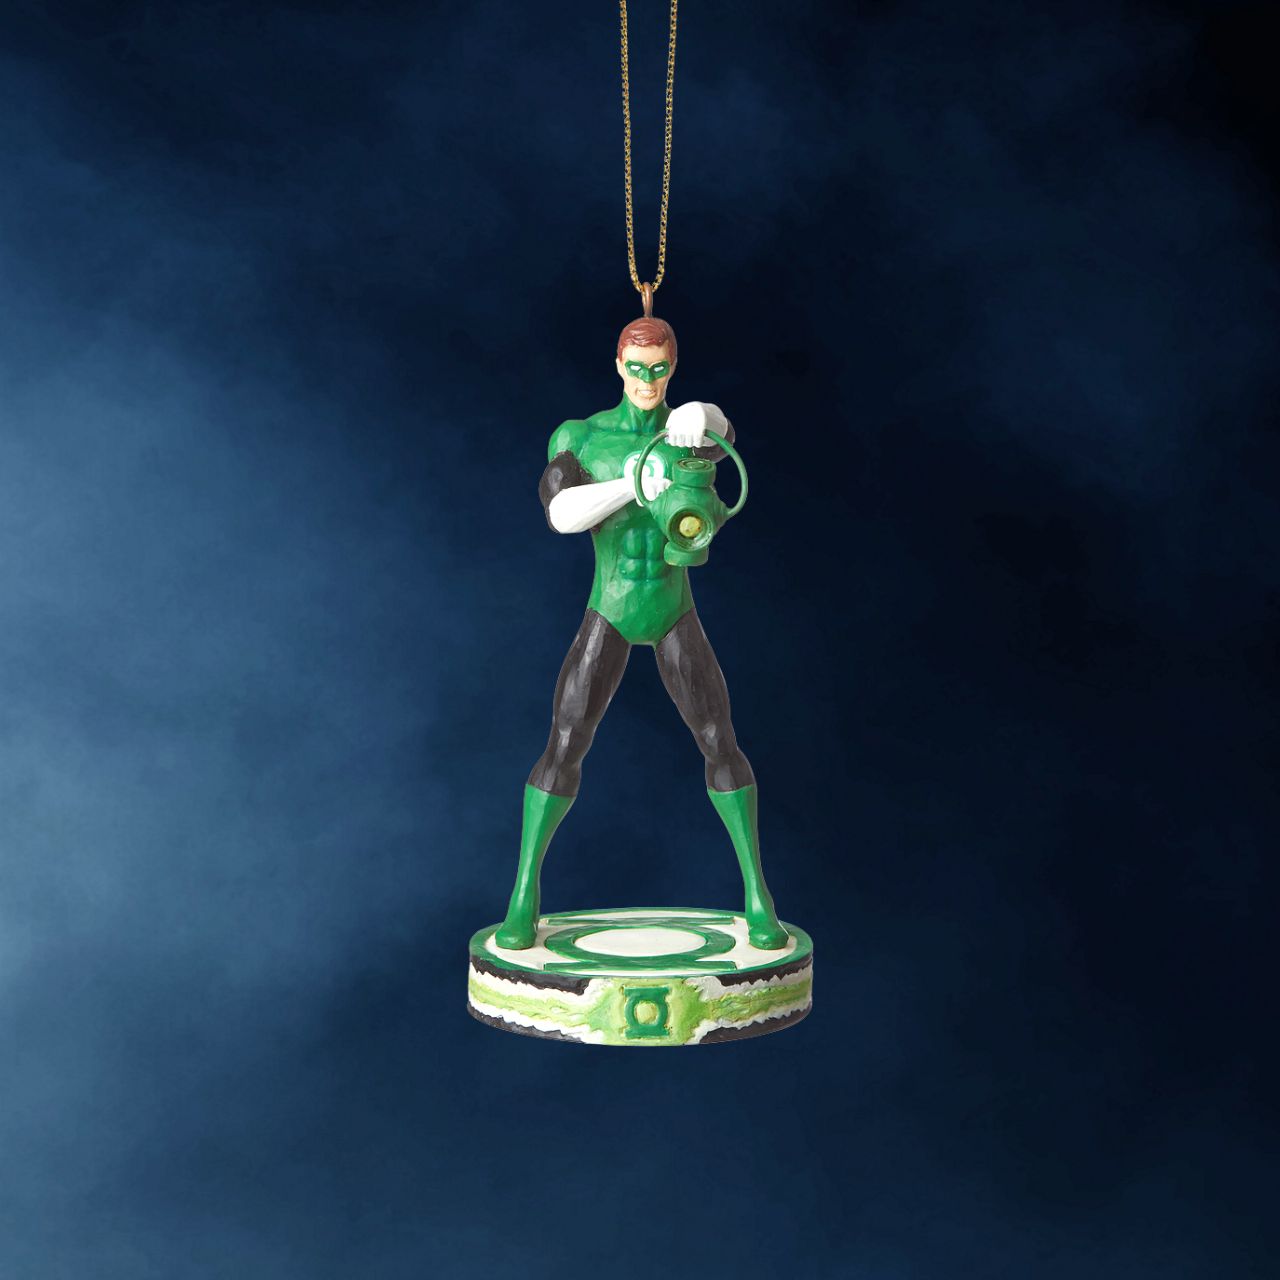 DC Comics By Jim Shore Green Lantern Christmas Hanging Ornament  DC Comics Justice League is a comprised of the world's most iconic superheroes. Jim Shore celebrates Green Lantern in an iconic pose in his signature wood carved look and folk art styling. Sure to be a treasured gift across the generations.